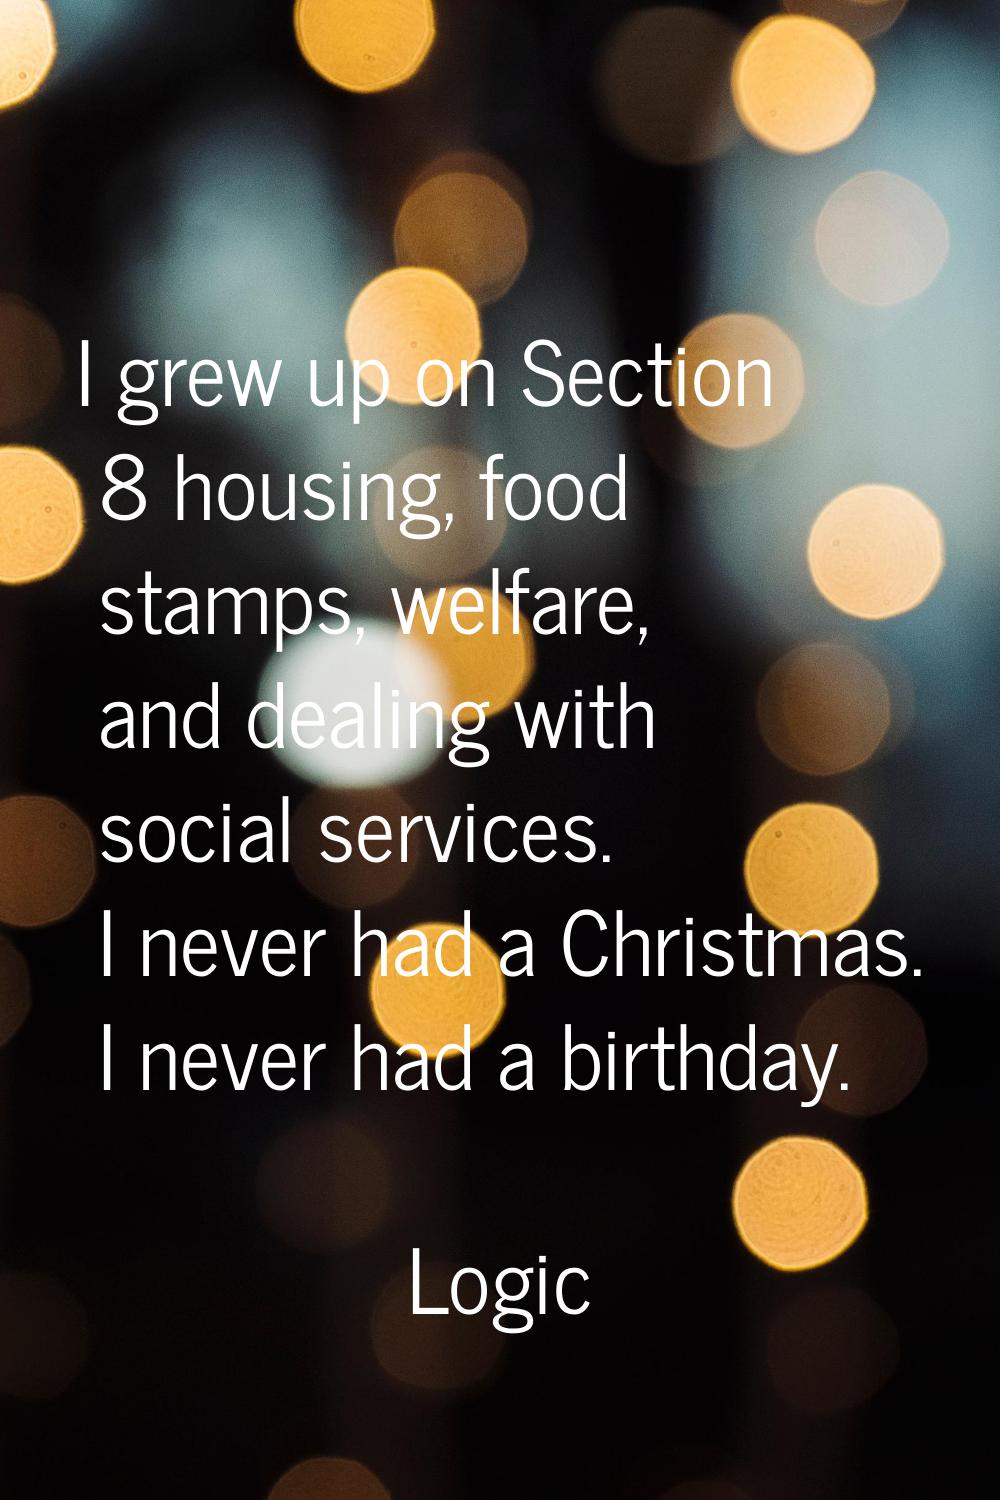 I grew up on Section 8 housing, food stamps, welfare, and dealing with social services. I never had